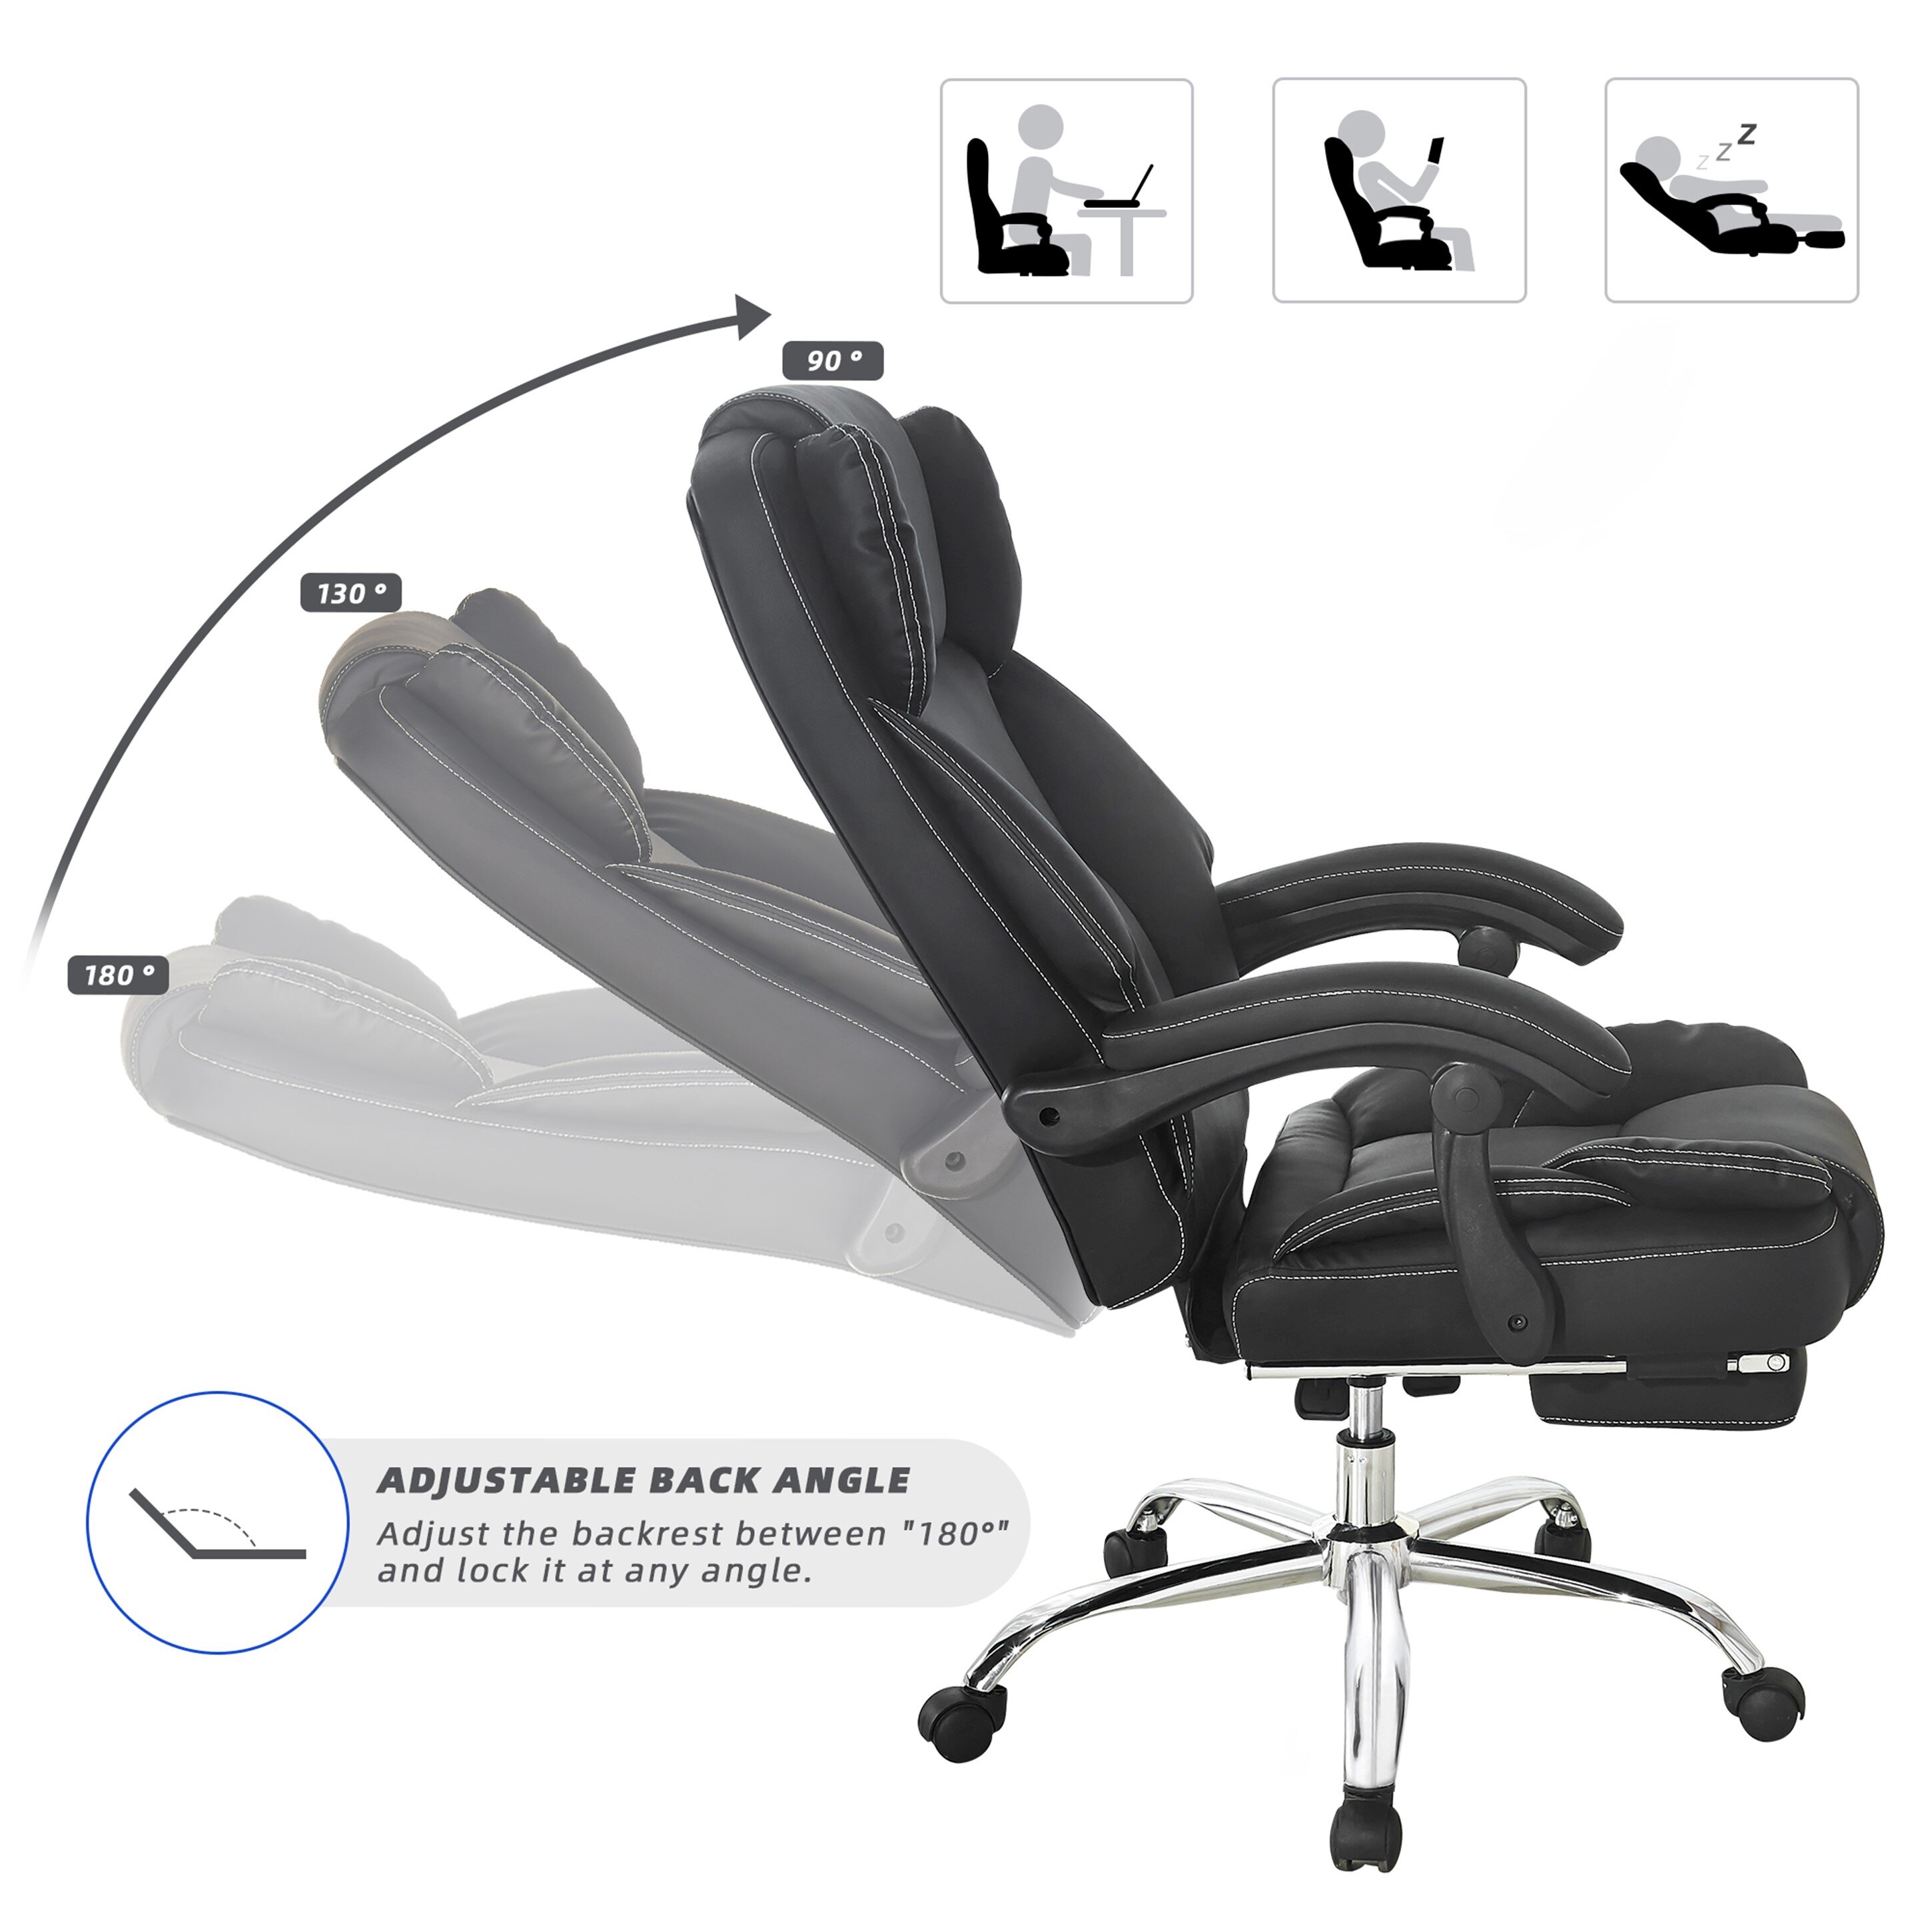 Ergonomic office chairs for pregnant women for Style and Durability 